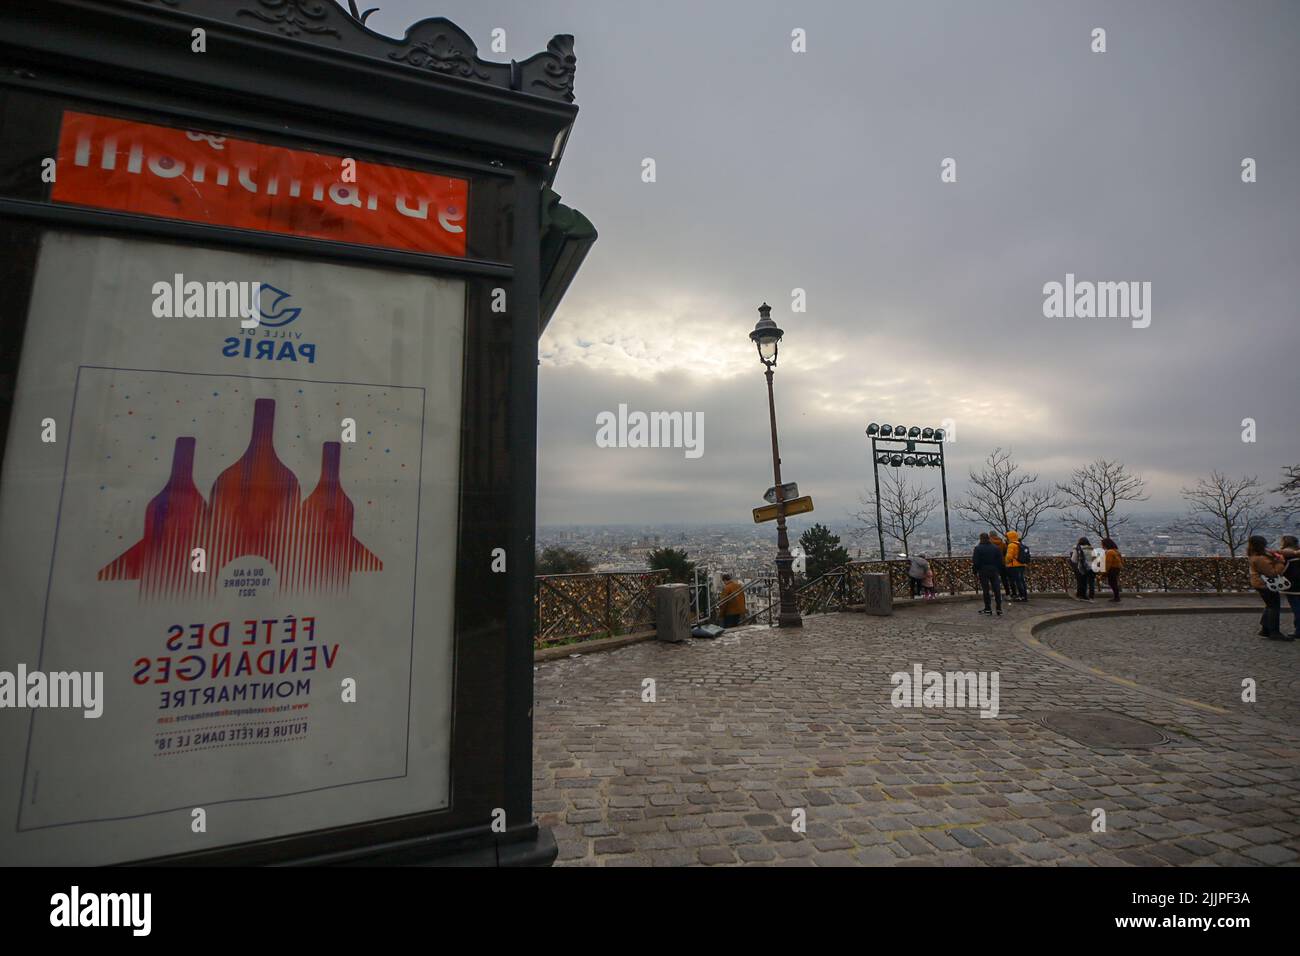 An advertising column in Paris, France, on a cloudy day Stock Photo